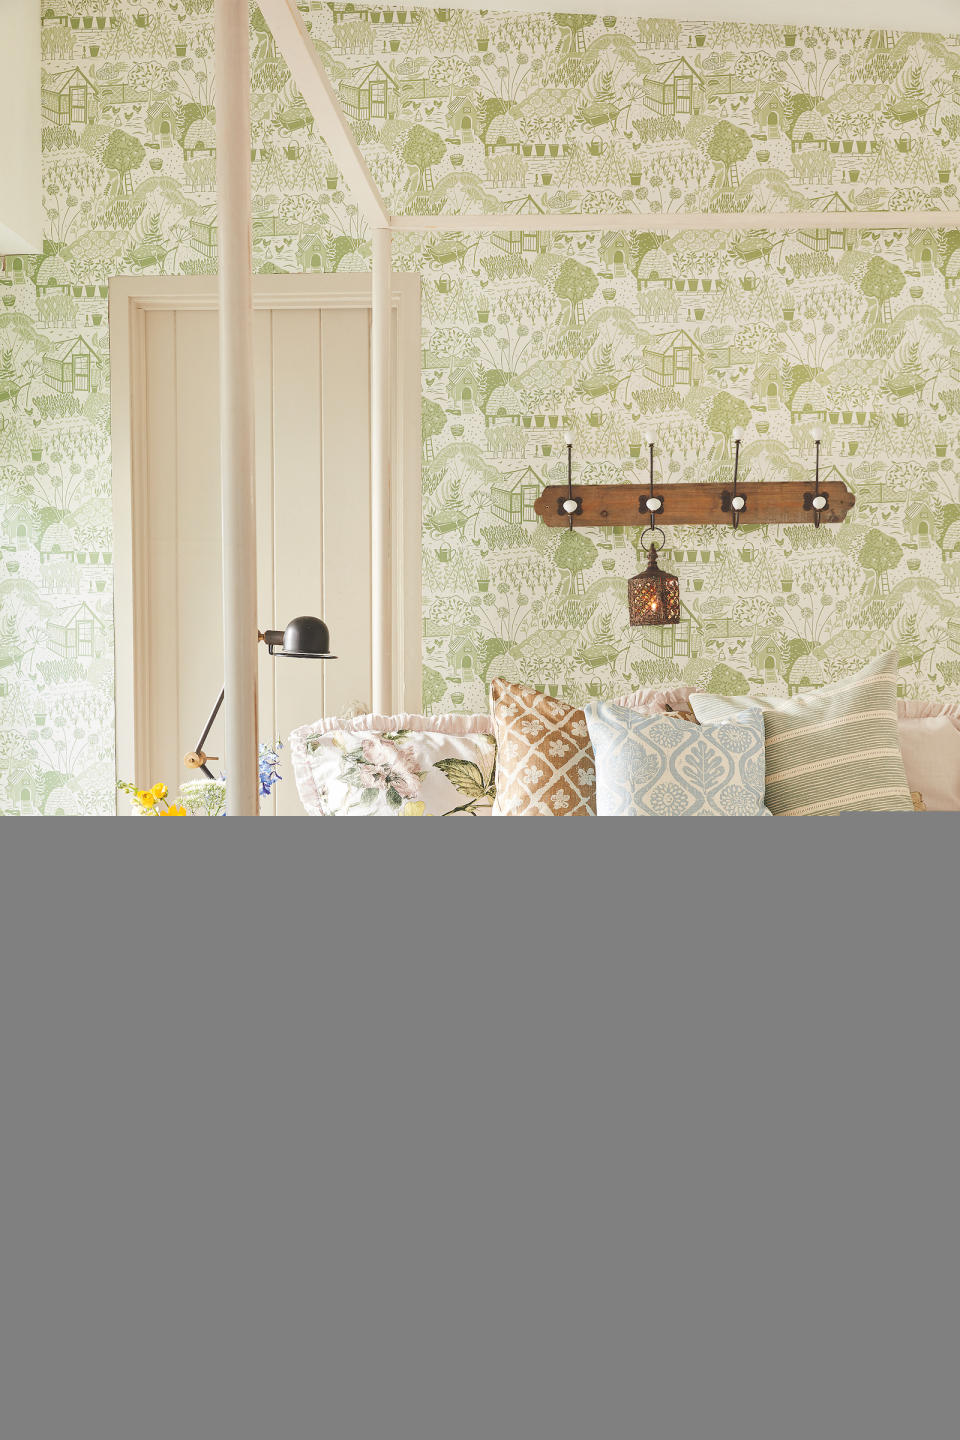 DECORATE WITH FOLKSY WALLPAPER